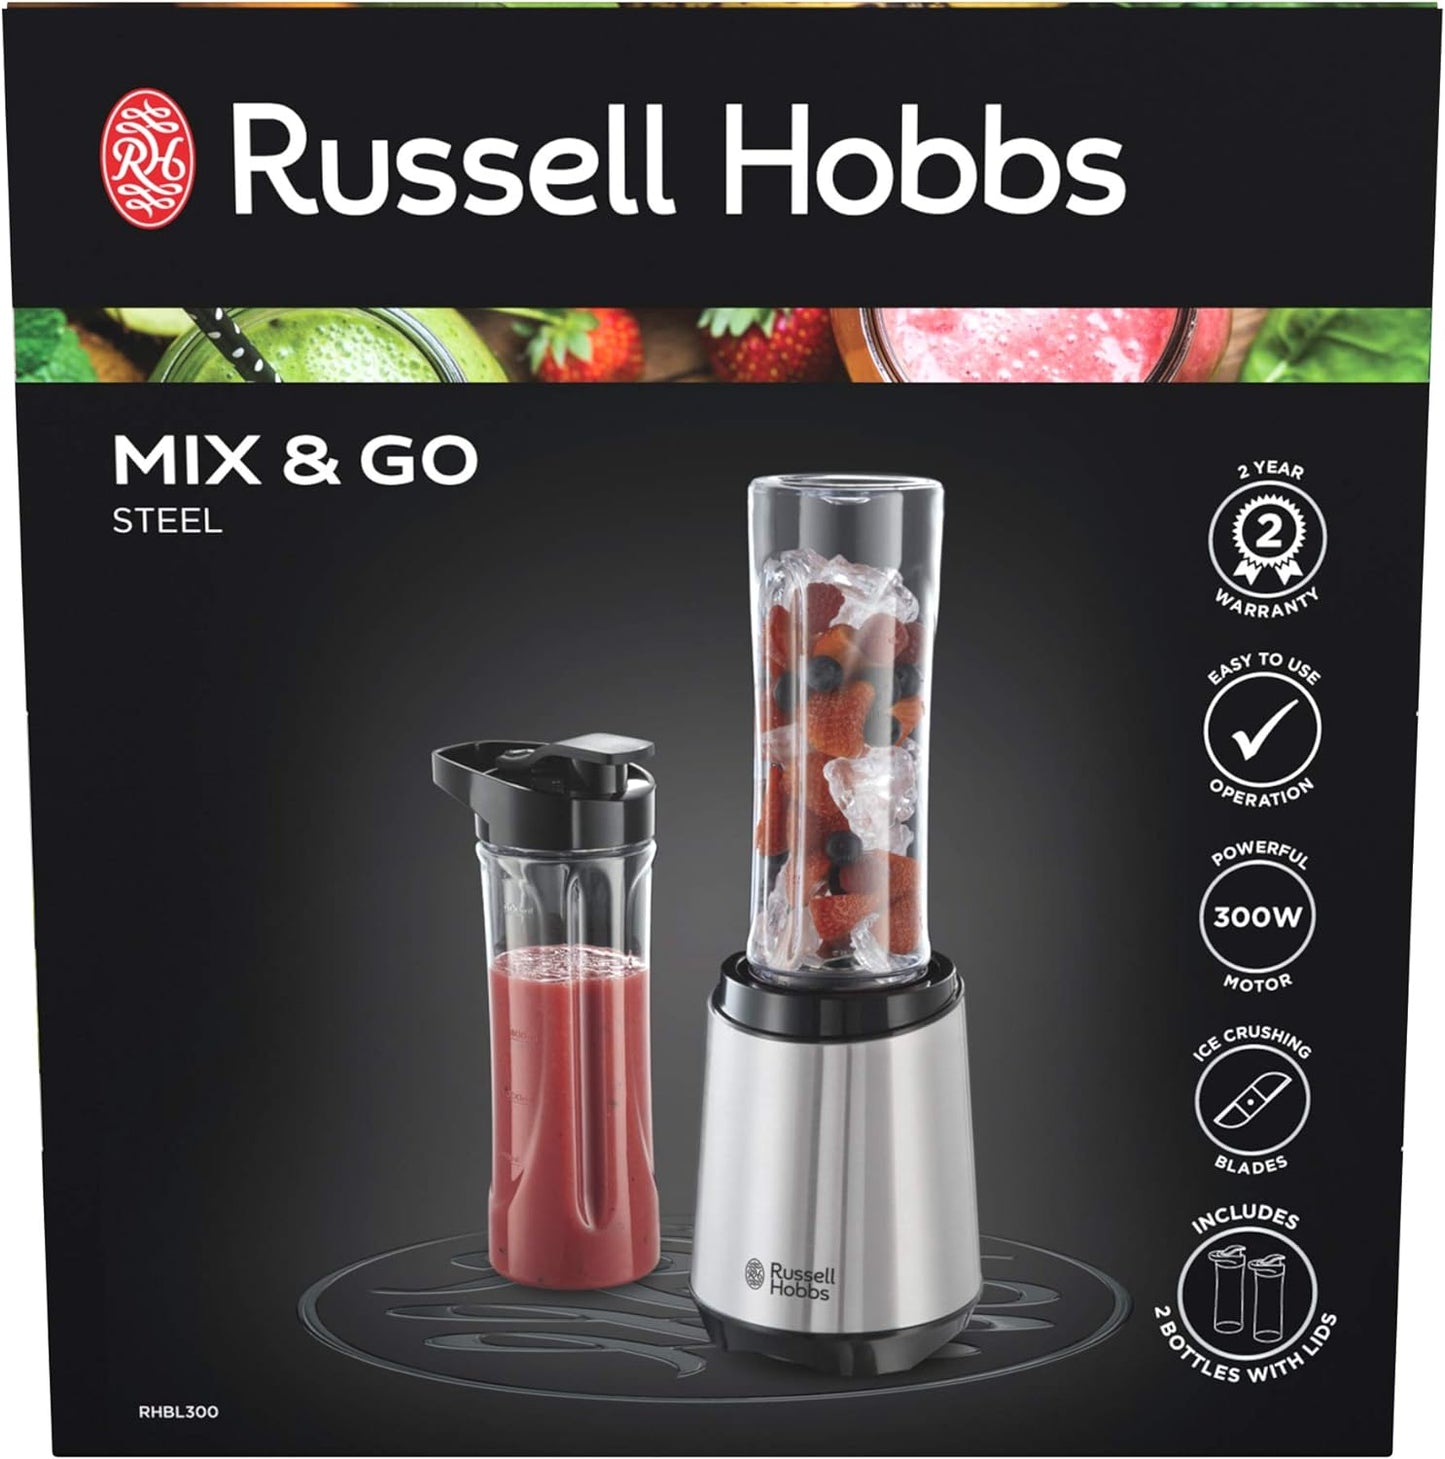 Russell Hobbs RHBL300, Mix and Go Stainless Steel Blender, 300 Watt Electric Motor and Dishwasher Safe, High Speed Blender, Silver/Black